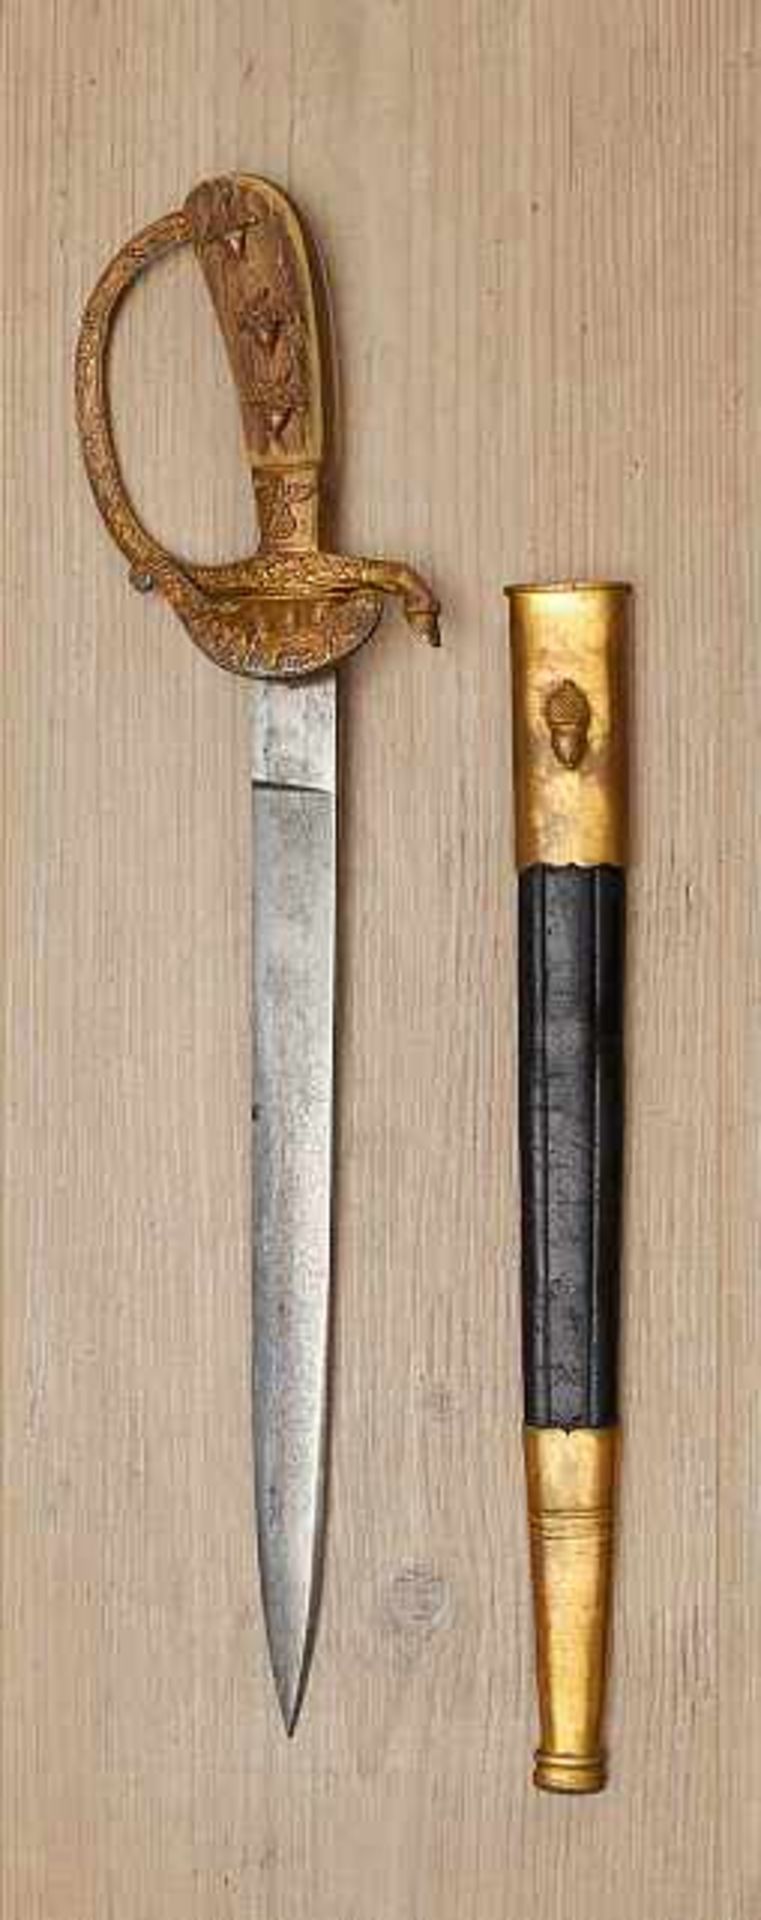 Deutsches Reich 1933 - 1945 - Hunting and Forestry : Hunting Cutlass.Gilded hilt features